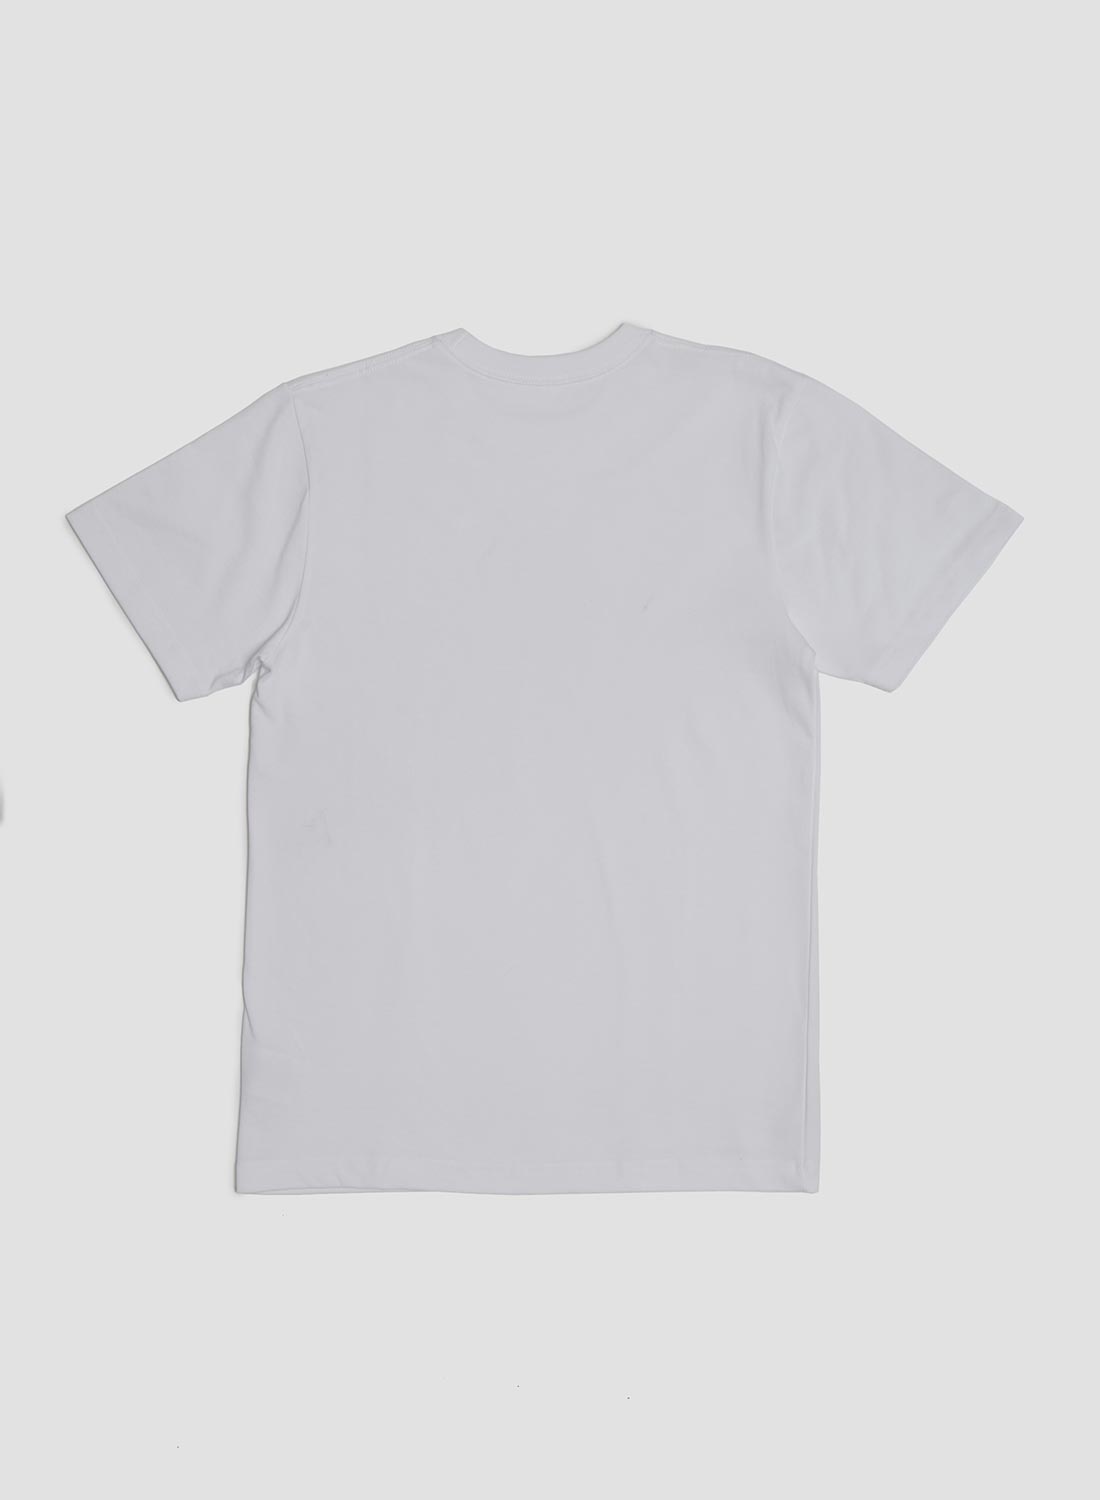 Heavy Duty Athletic T-Shirt in White - 4